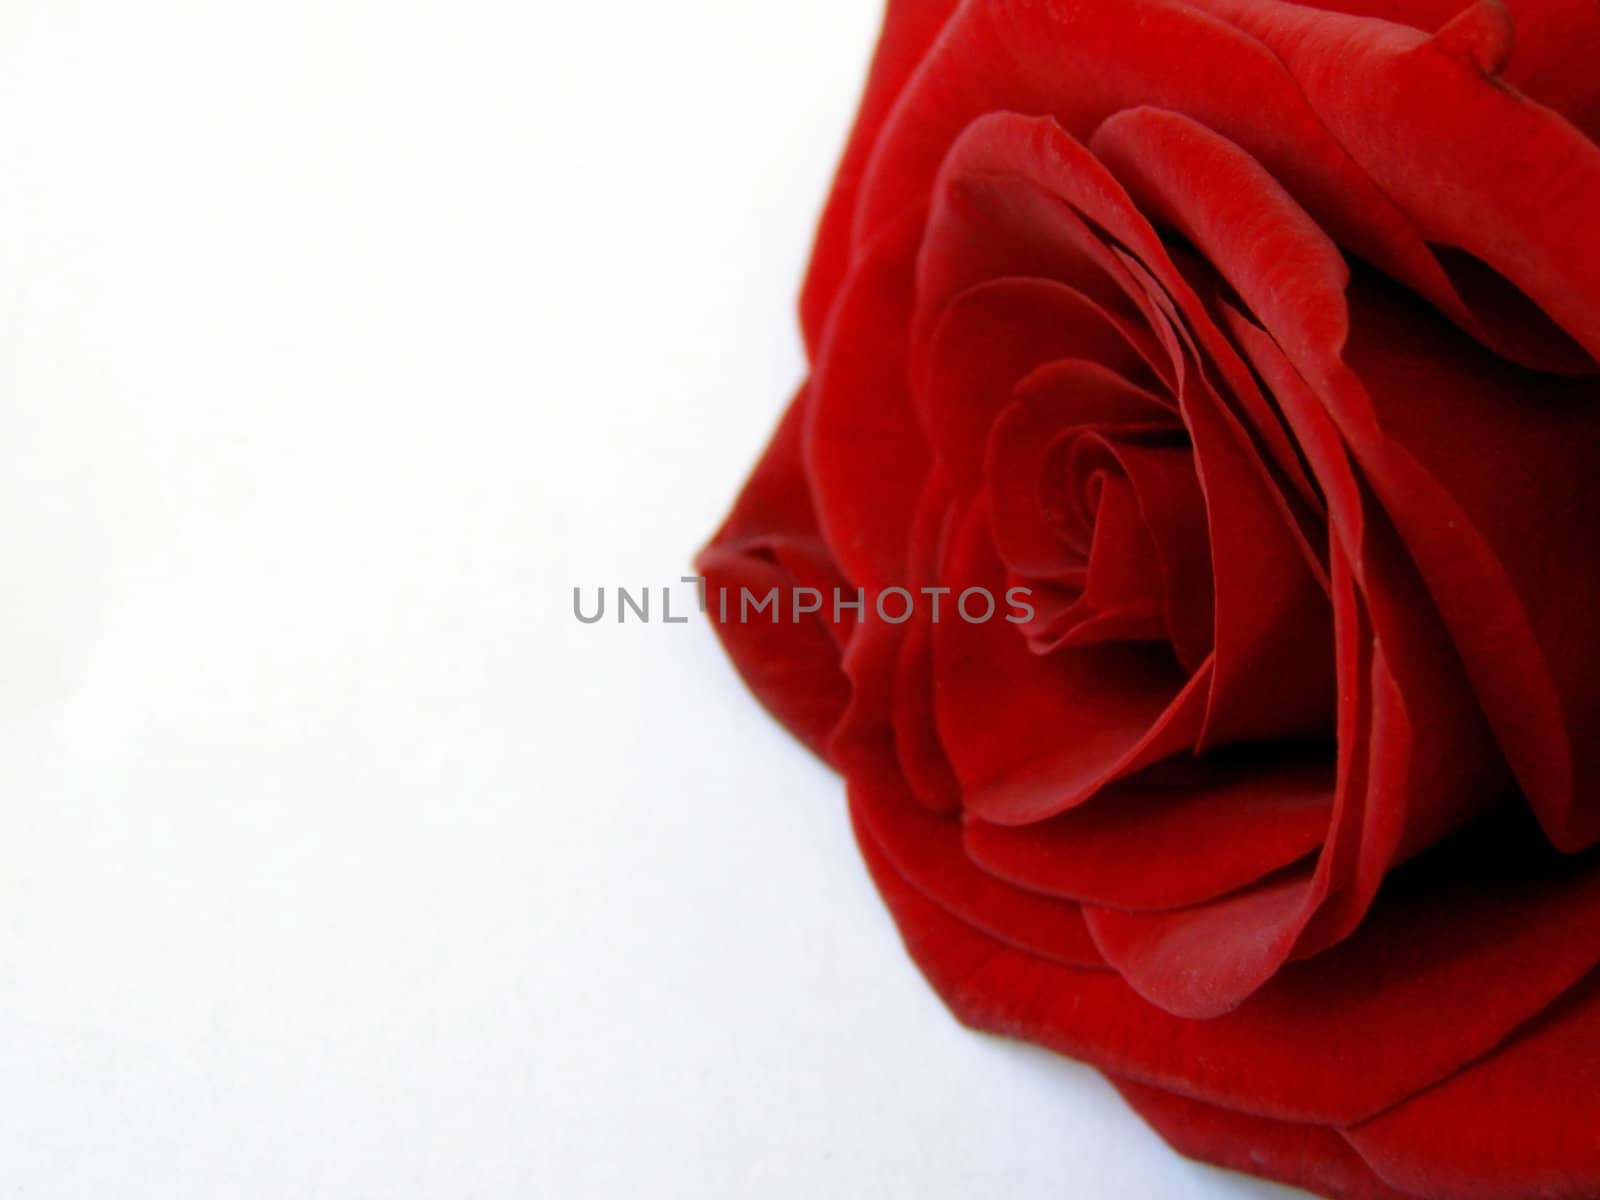 The red rose, presented to the dear person, lies on the white. The velvety red rose petal of flower are still full of freshness and tenderness